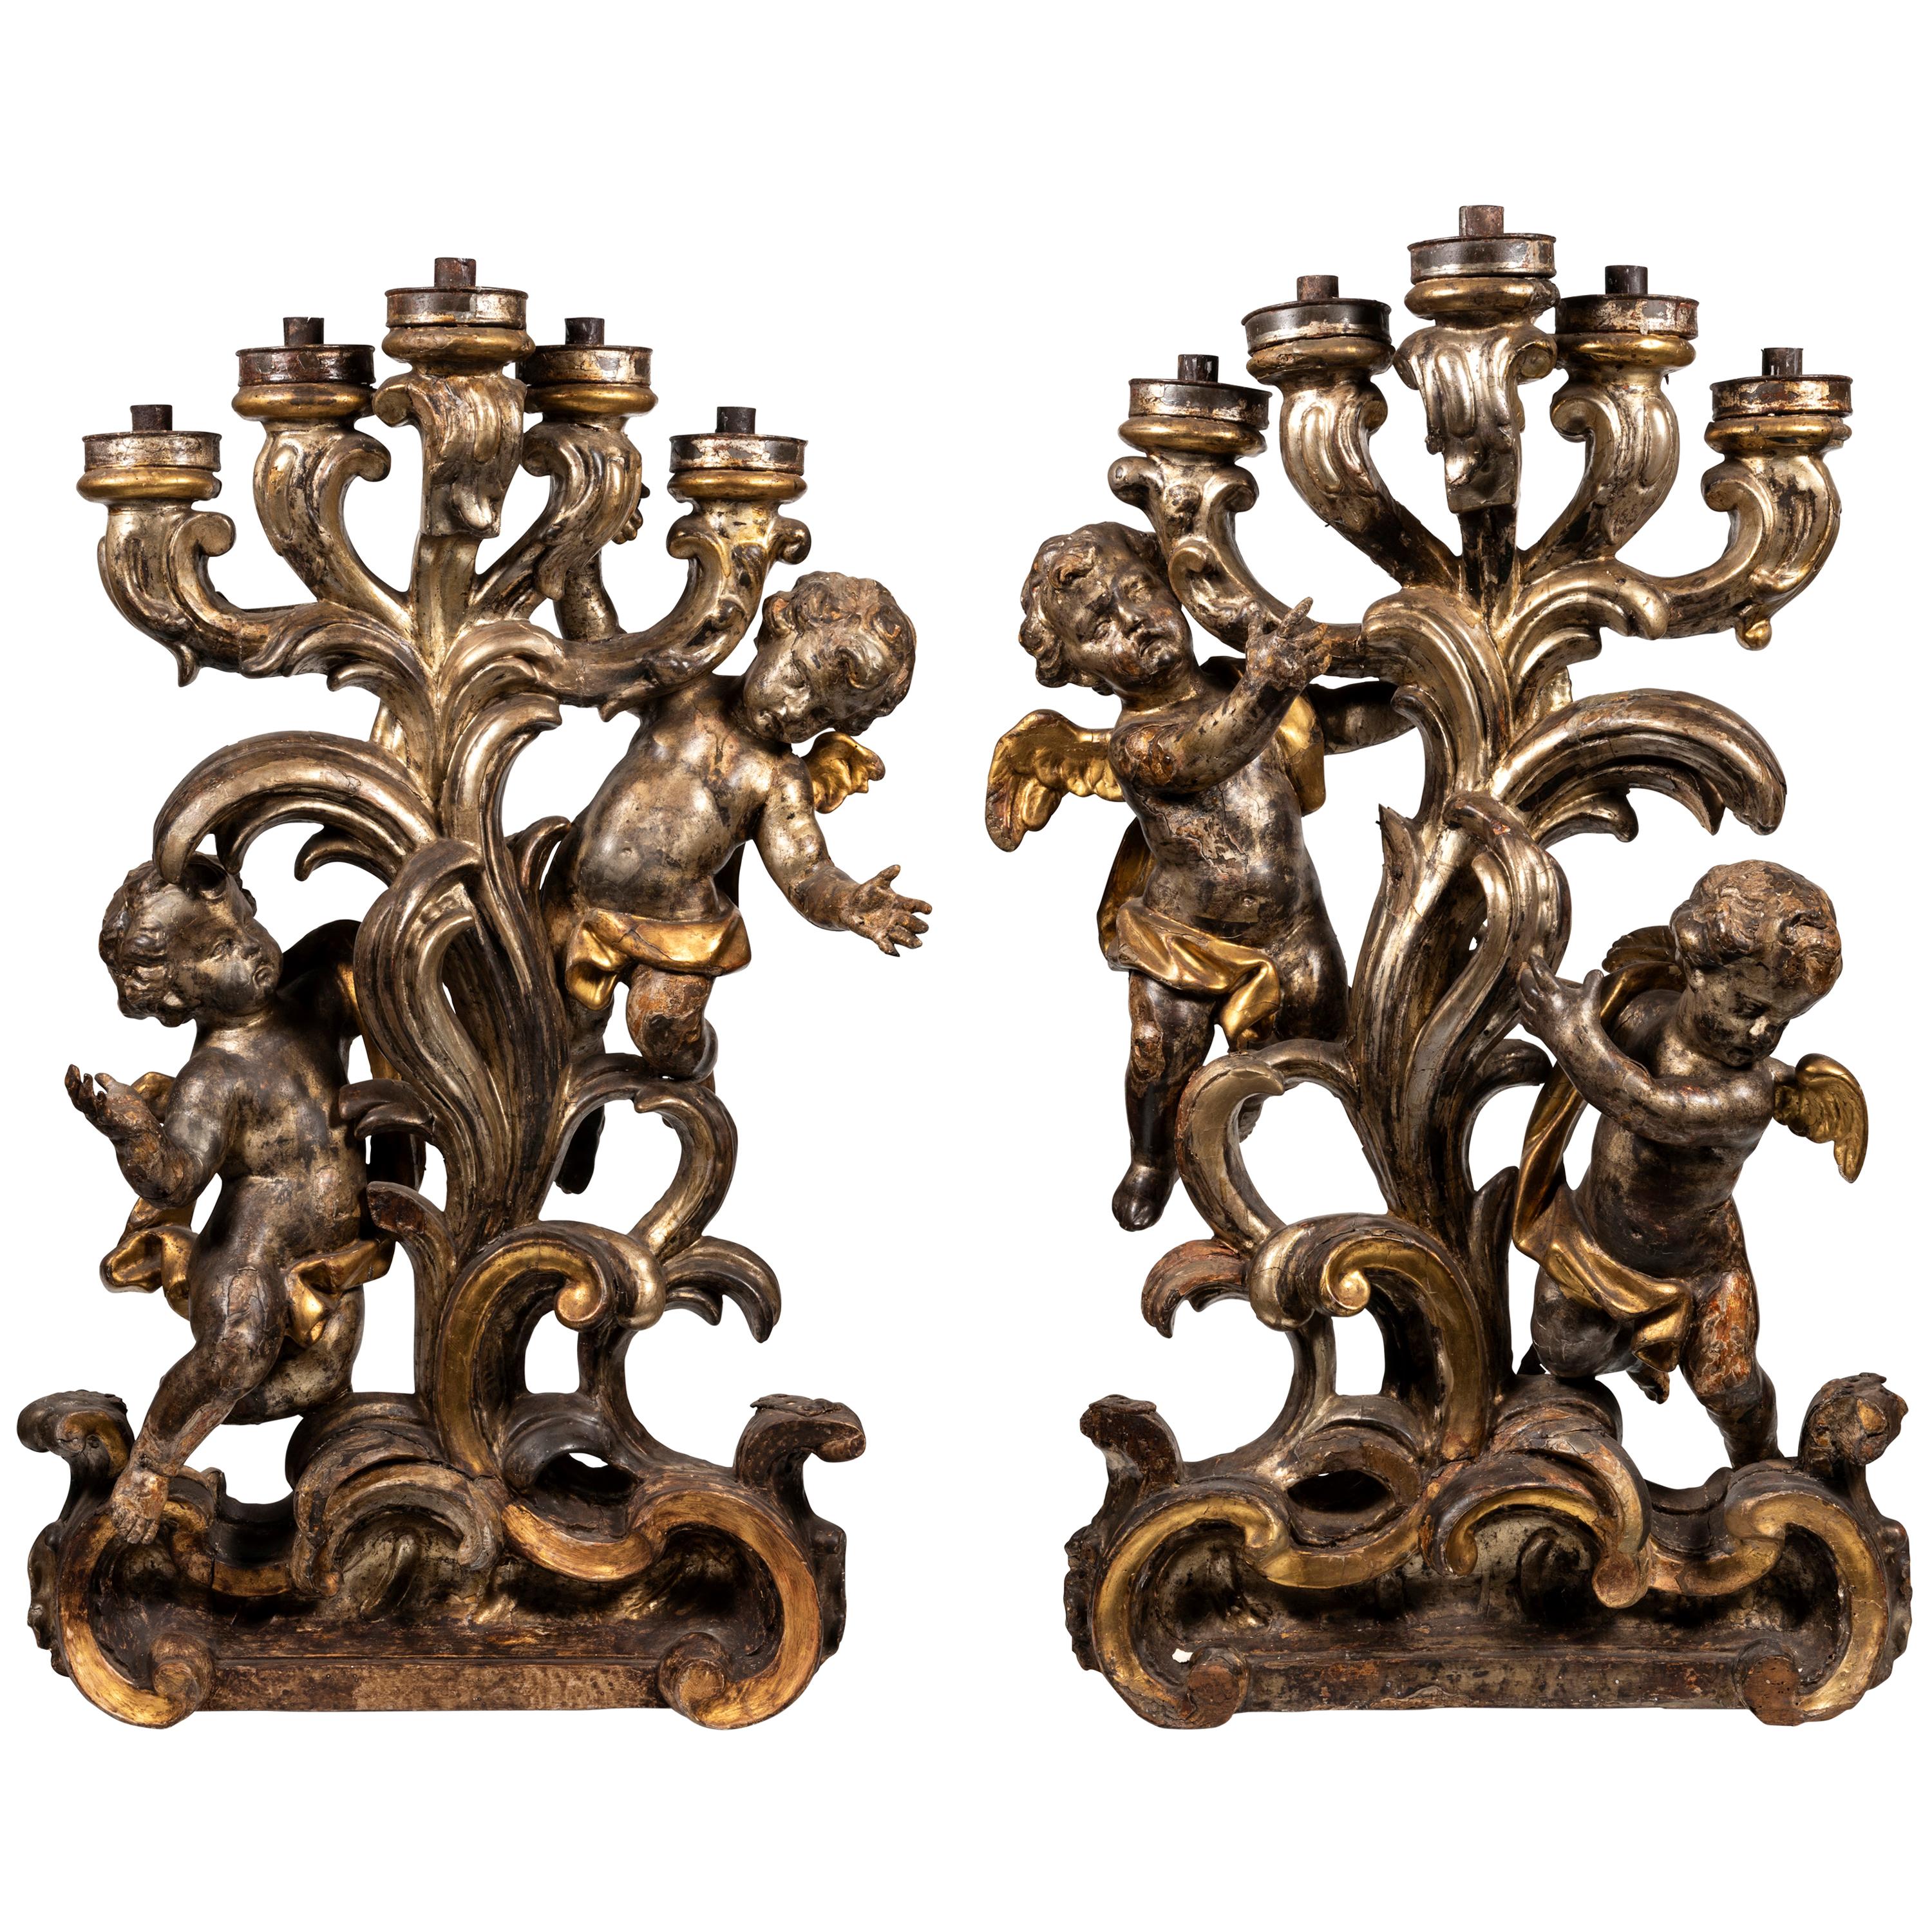 A Matched Pair of 18th Century Italian Silver Gilt Figurative Candelabra For Sale